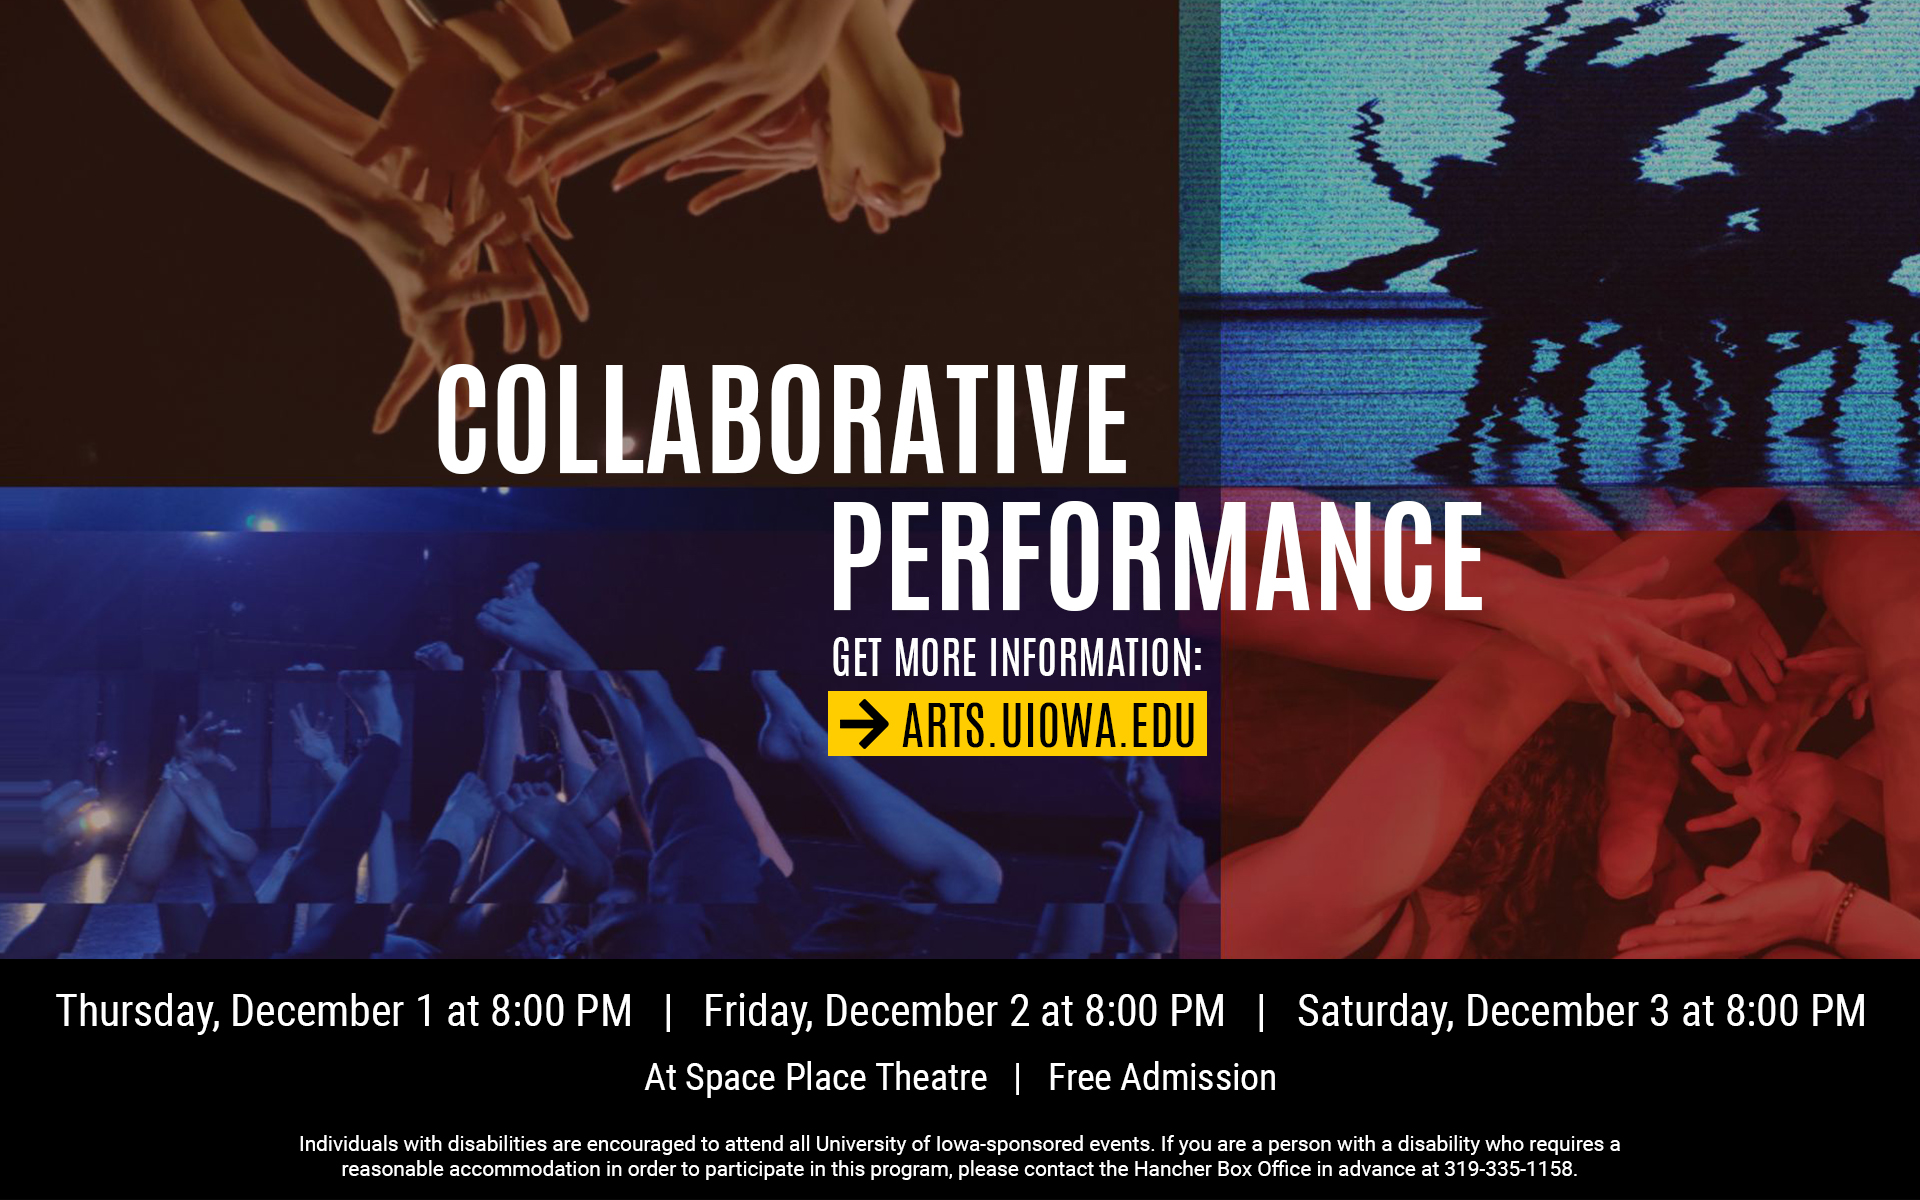 Collaborative Performance Get more information at arts.uiowa.edu December 1, 2, 3 at 8PM at Space Place Theatre Free Admission 